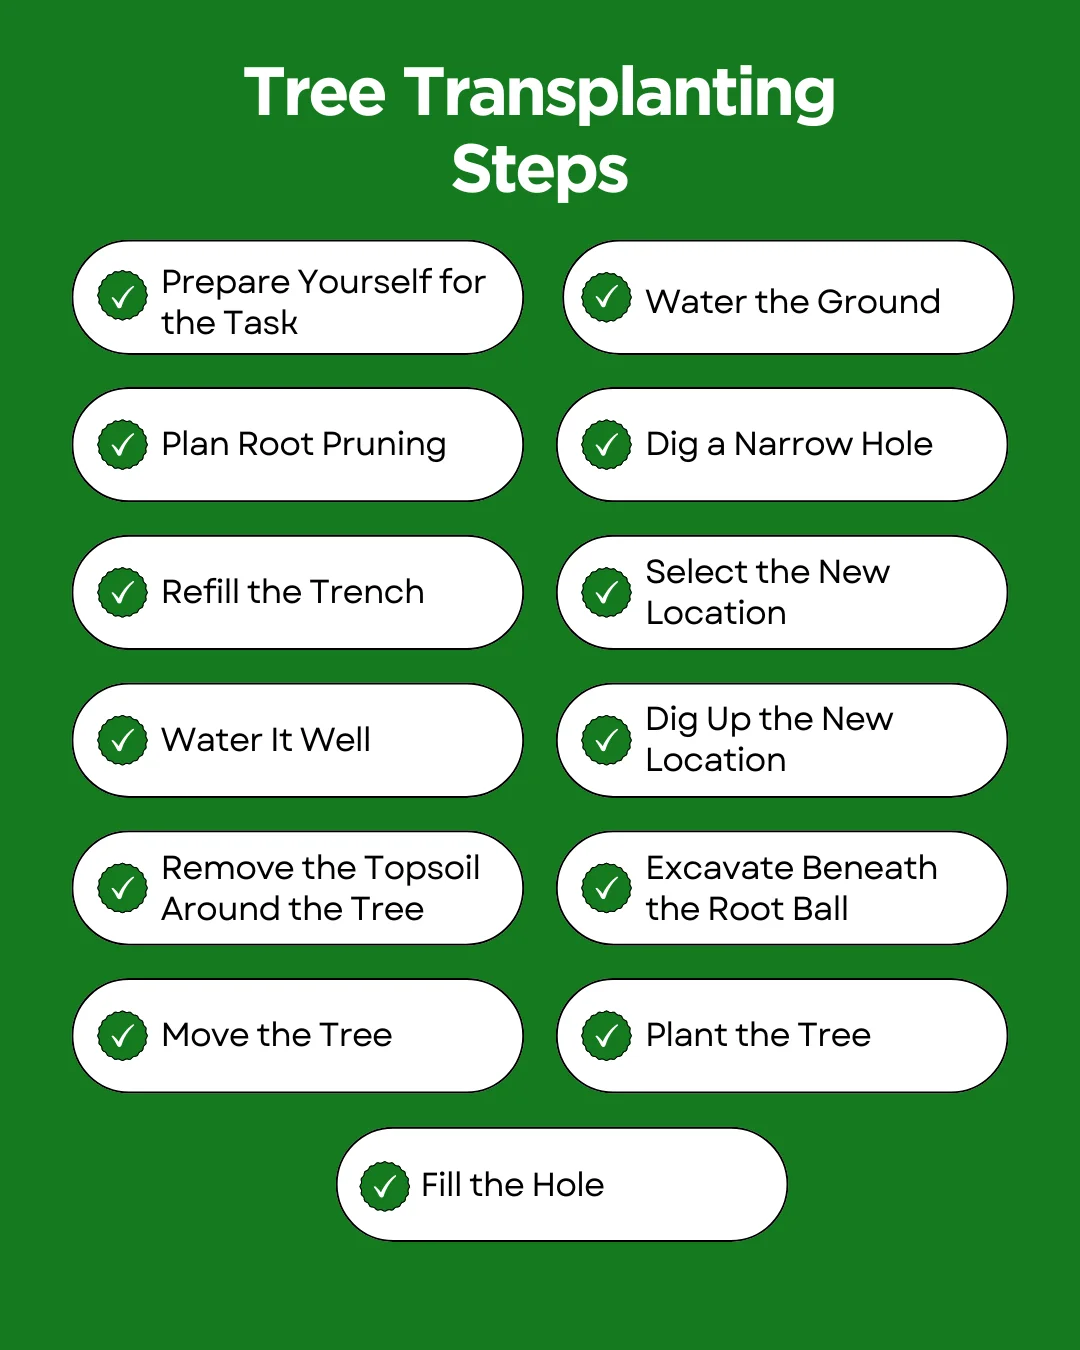 An infographic explaining the tree transplanting steps